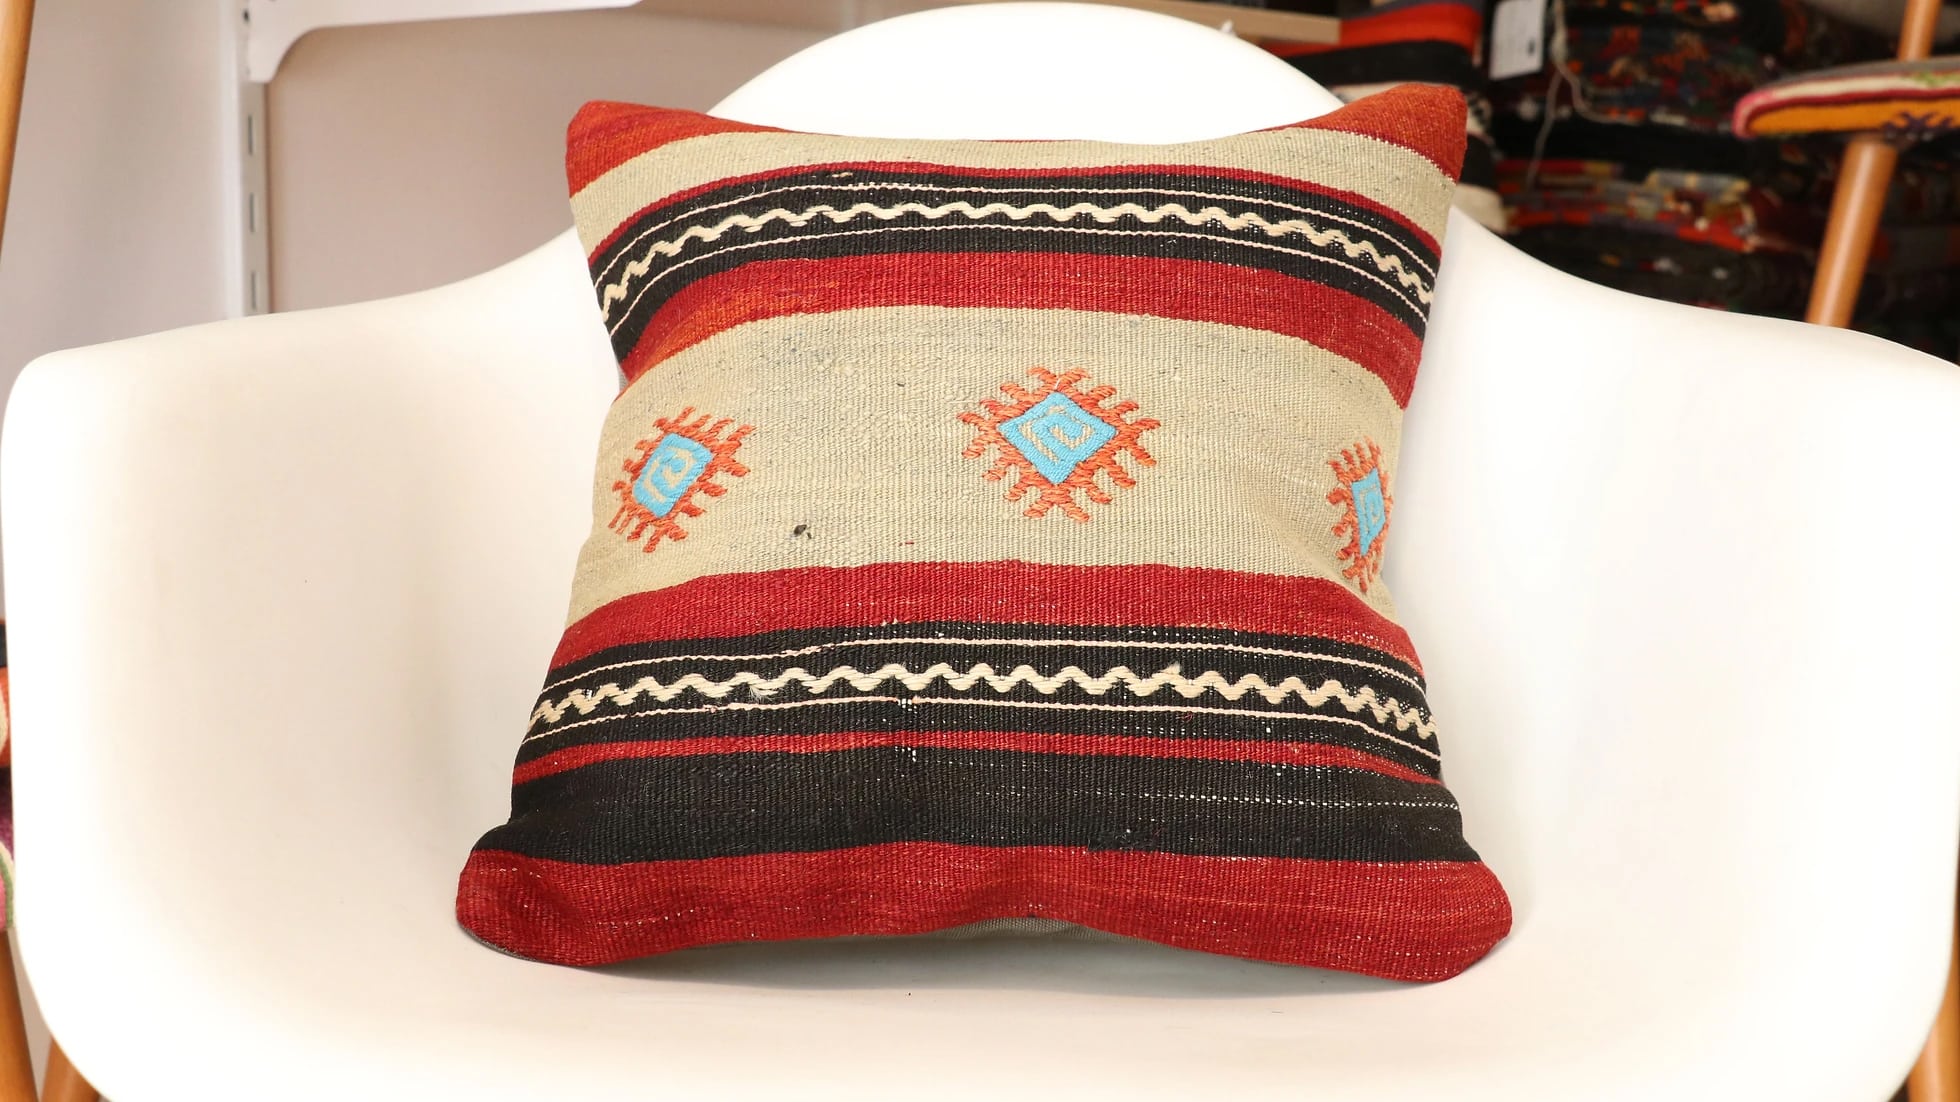 vintage kilim covered pillow with blue diamond patterns in beige, black, and red